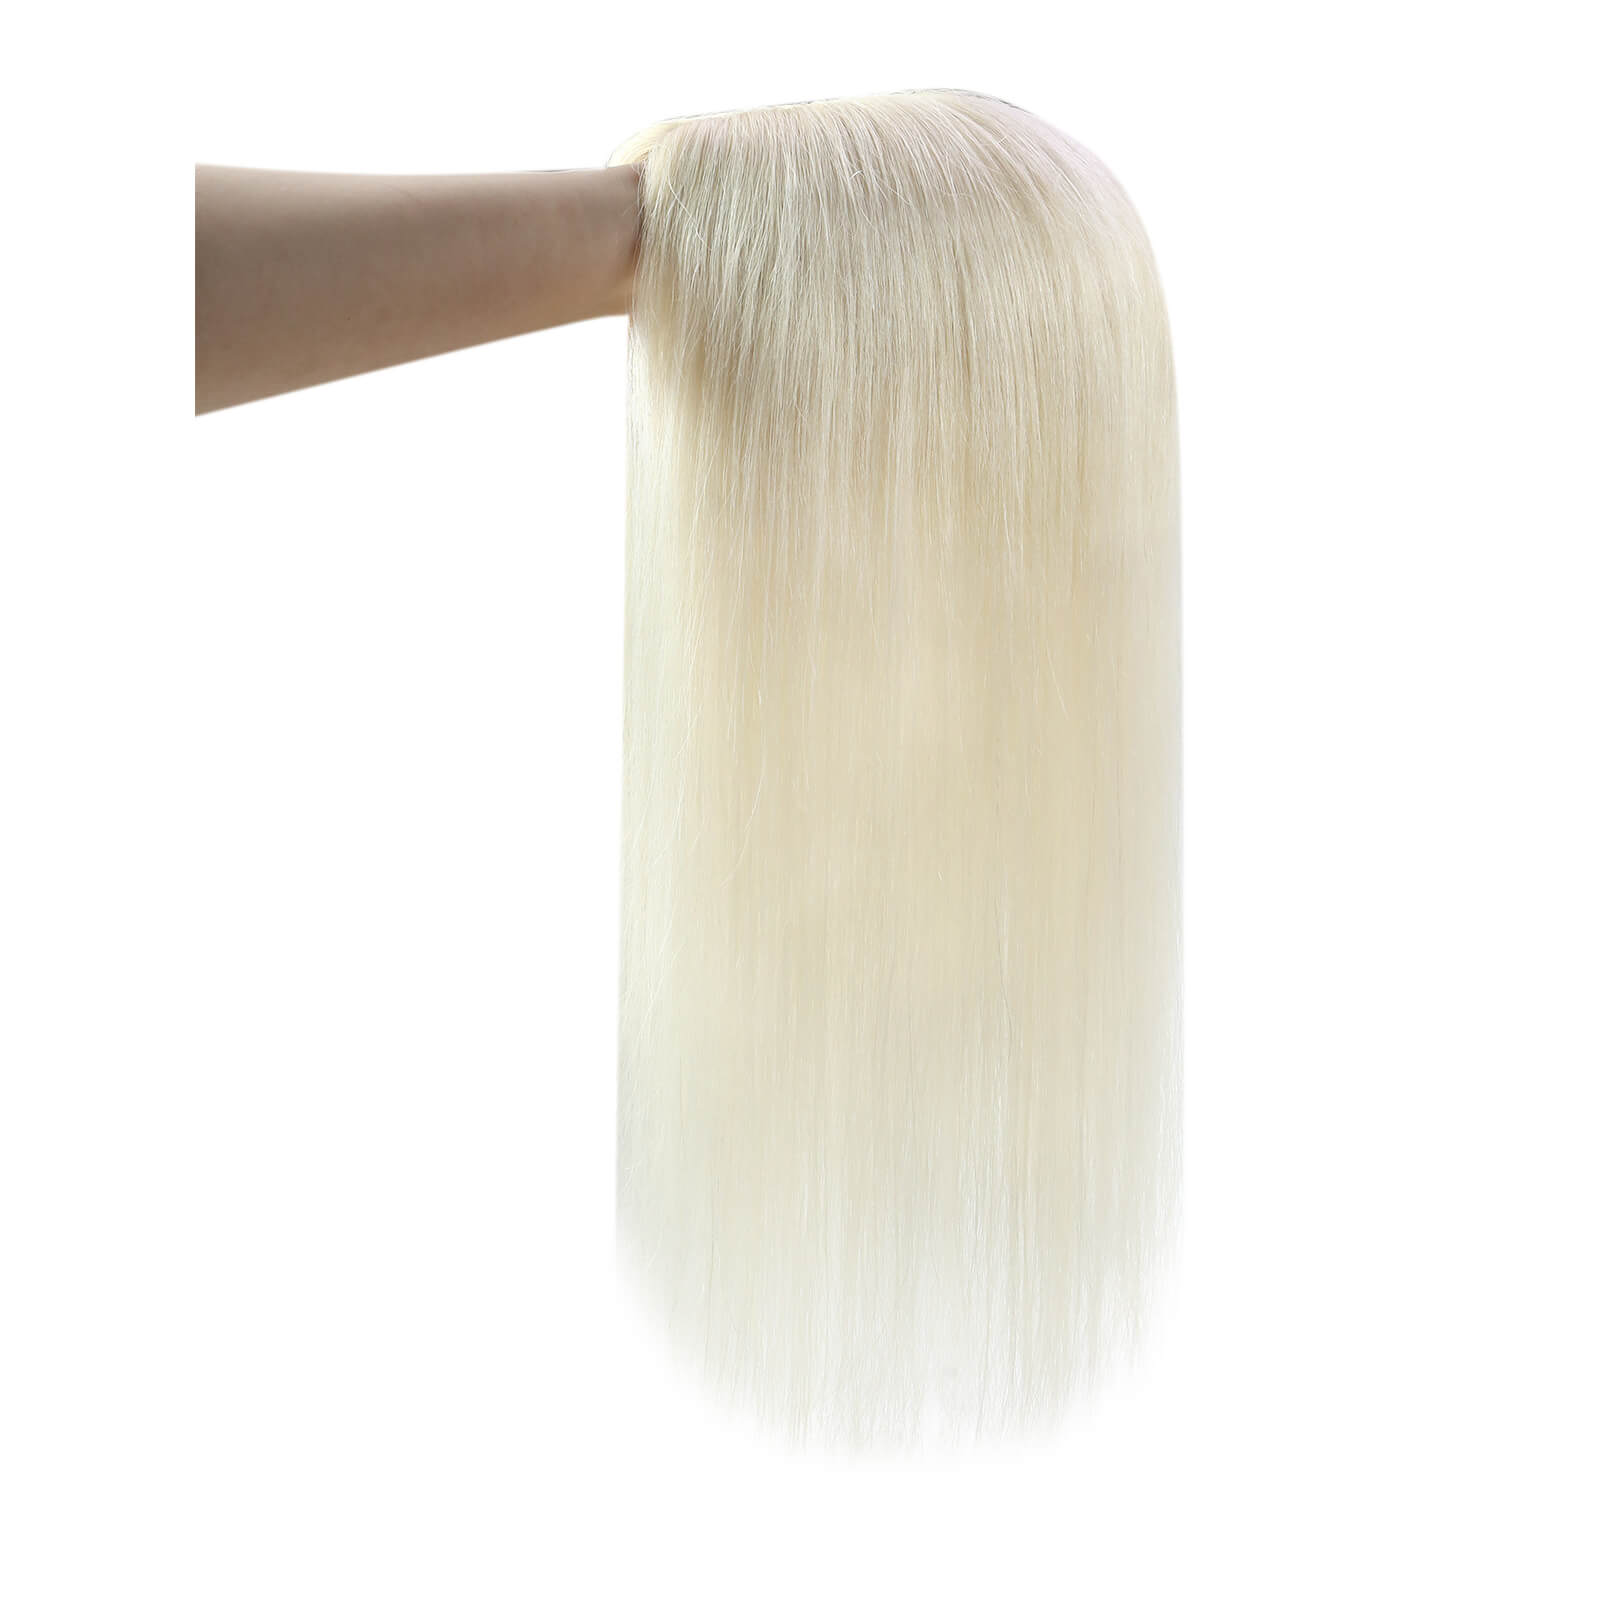 100% real human hair topper pure blond color for hair loss